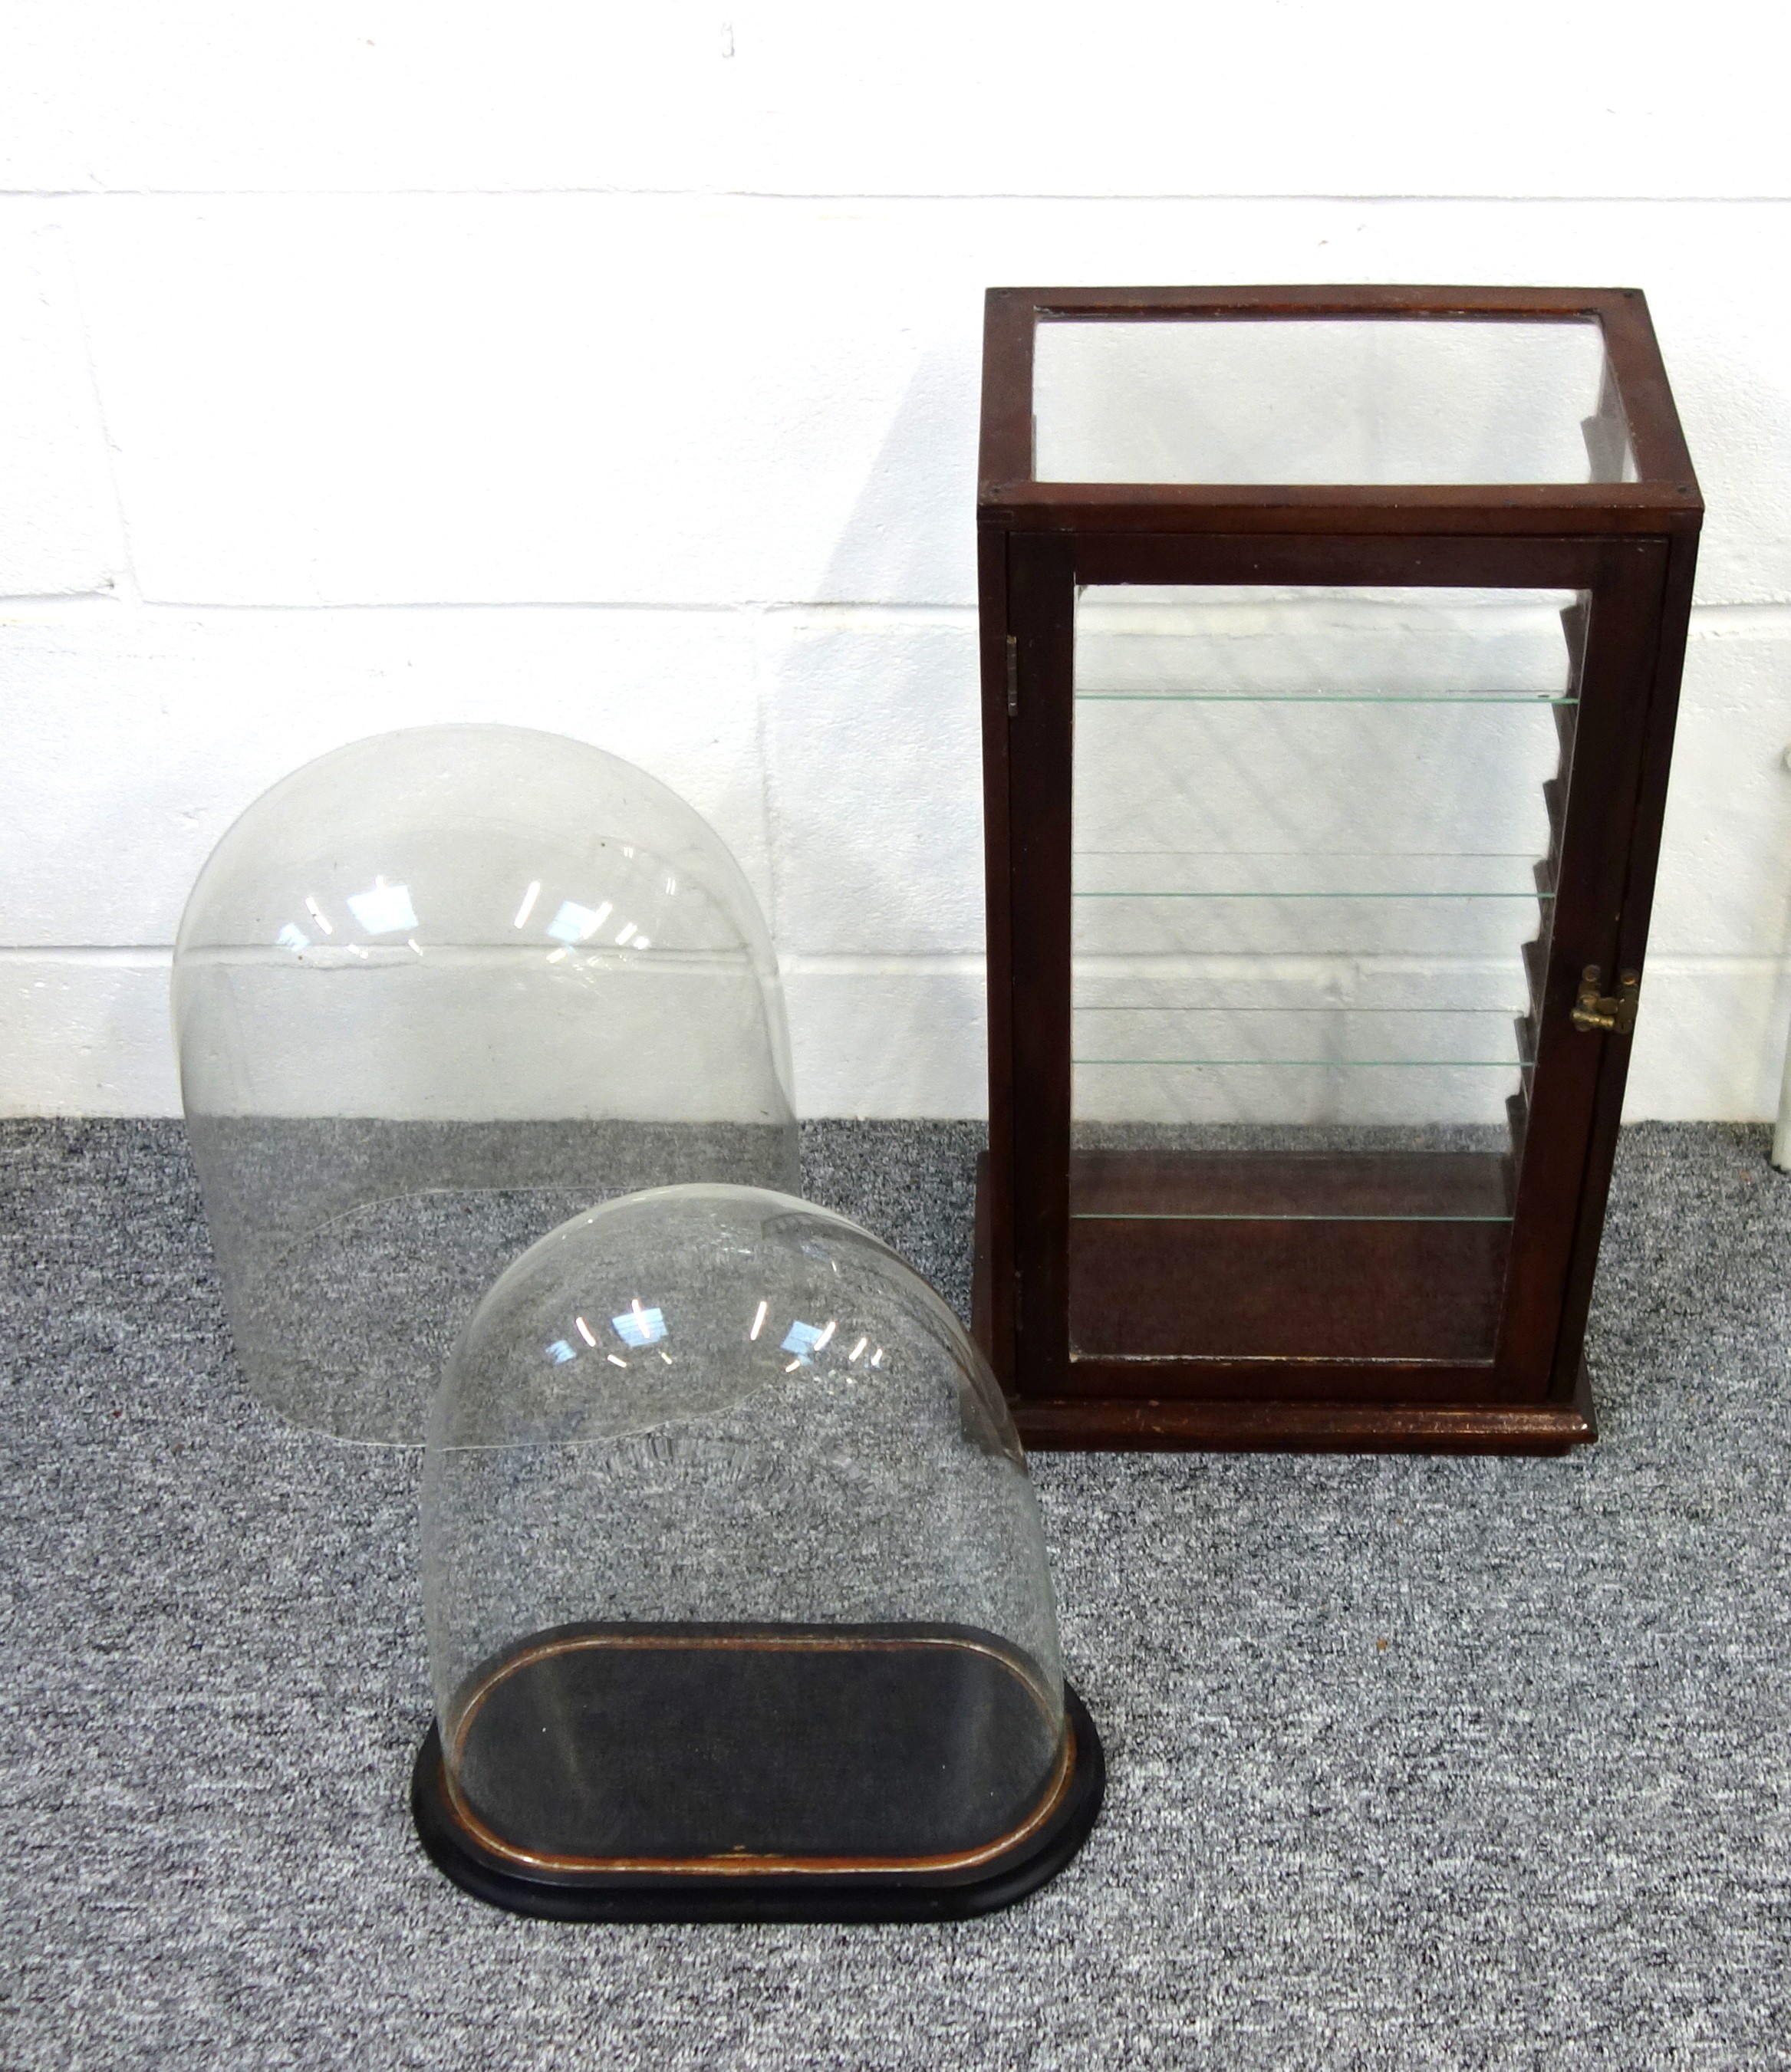 Stained beech table top collector's cabinet with 4 glass shelves, 57.5 x 32.5 x 21.5cm overall; - Image 2 of 4